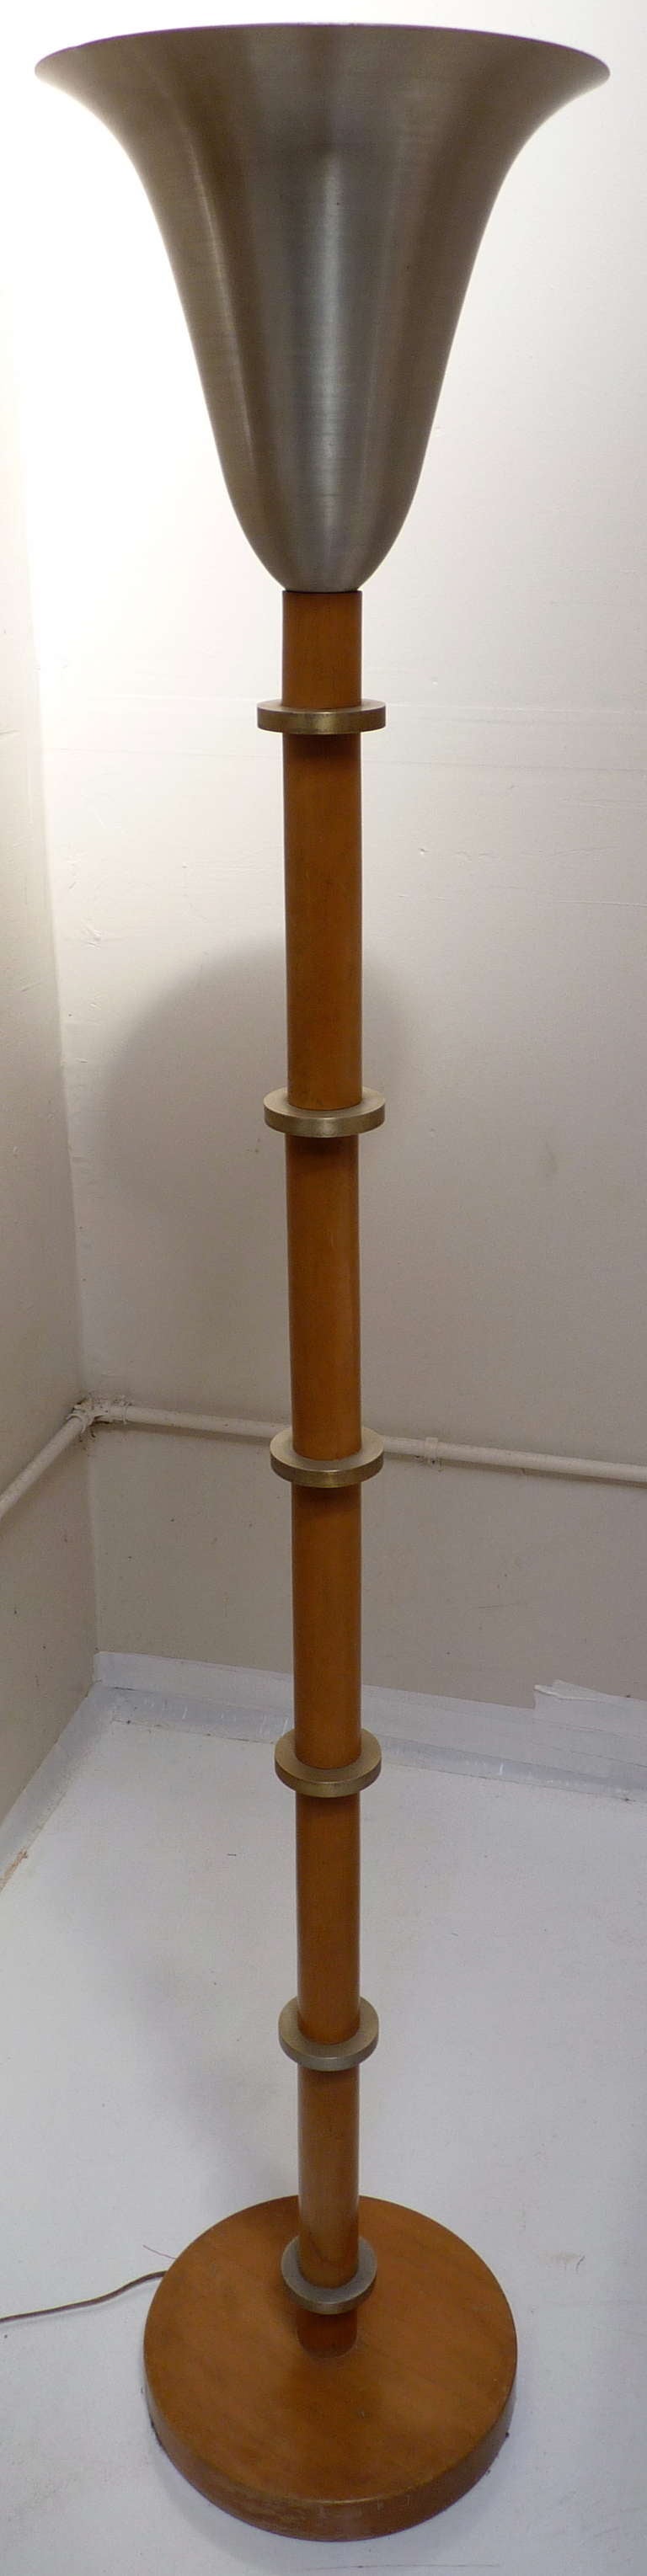 Russel Wright Aluminum Floor Lamp with solid wood and brass rings to stem and spun aluminum upper. Torchiere is in excellent condition with nice patina to wood and brass and aluminum free of typical dings. Ready for installation, this early